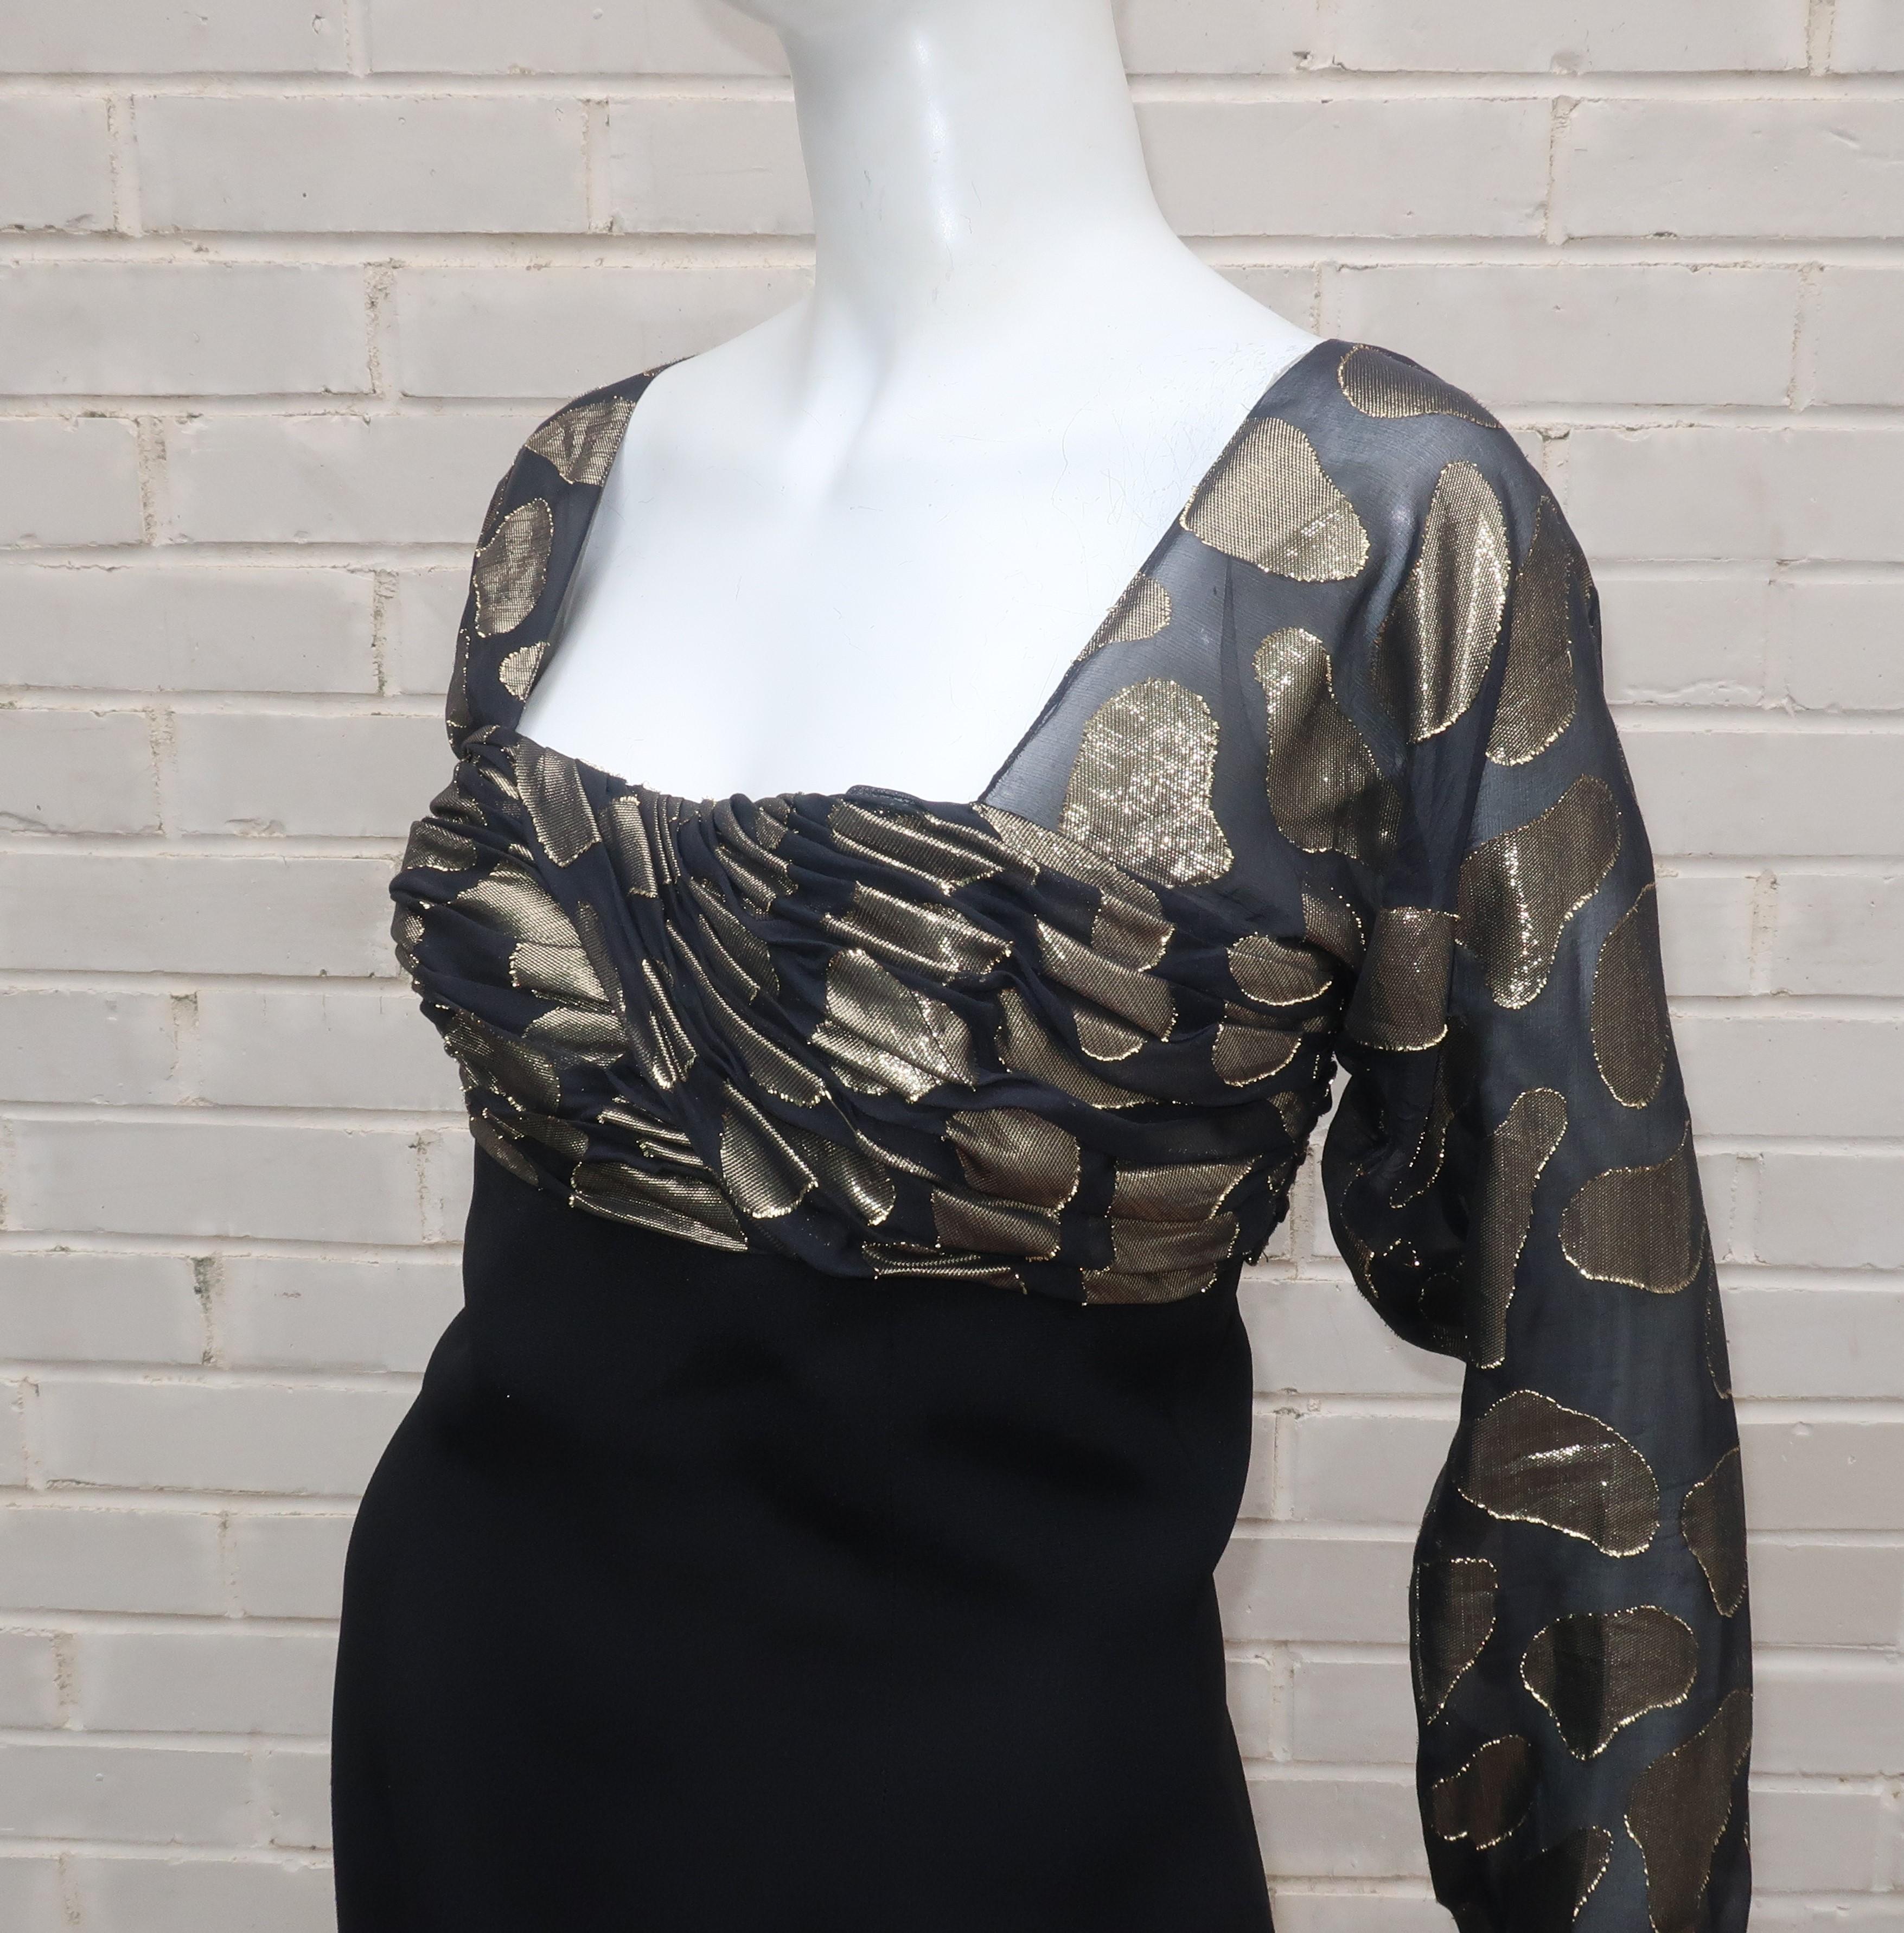 Snooty Hooty Black Crepe & Gold Lamé Cocktail Dress, C.1980 For Sale 1